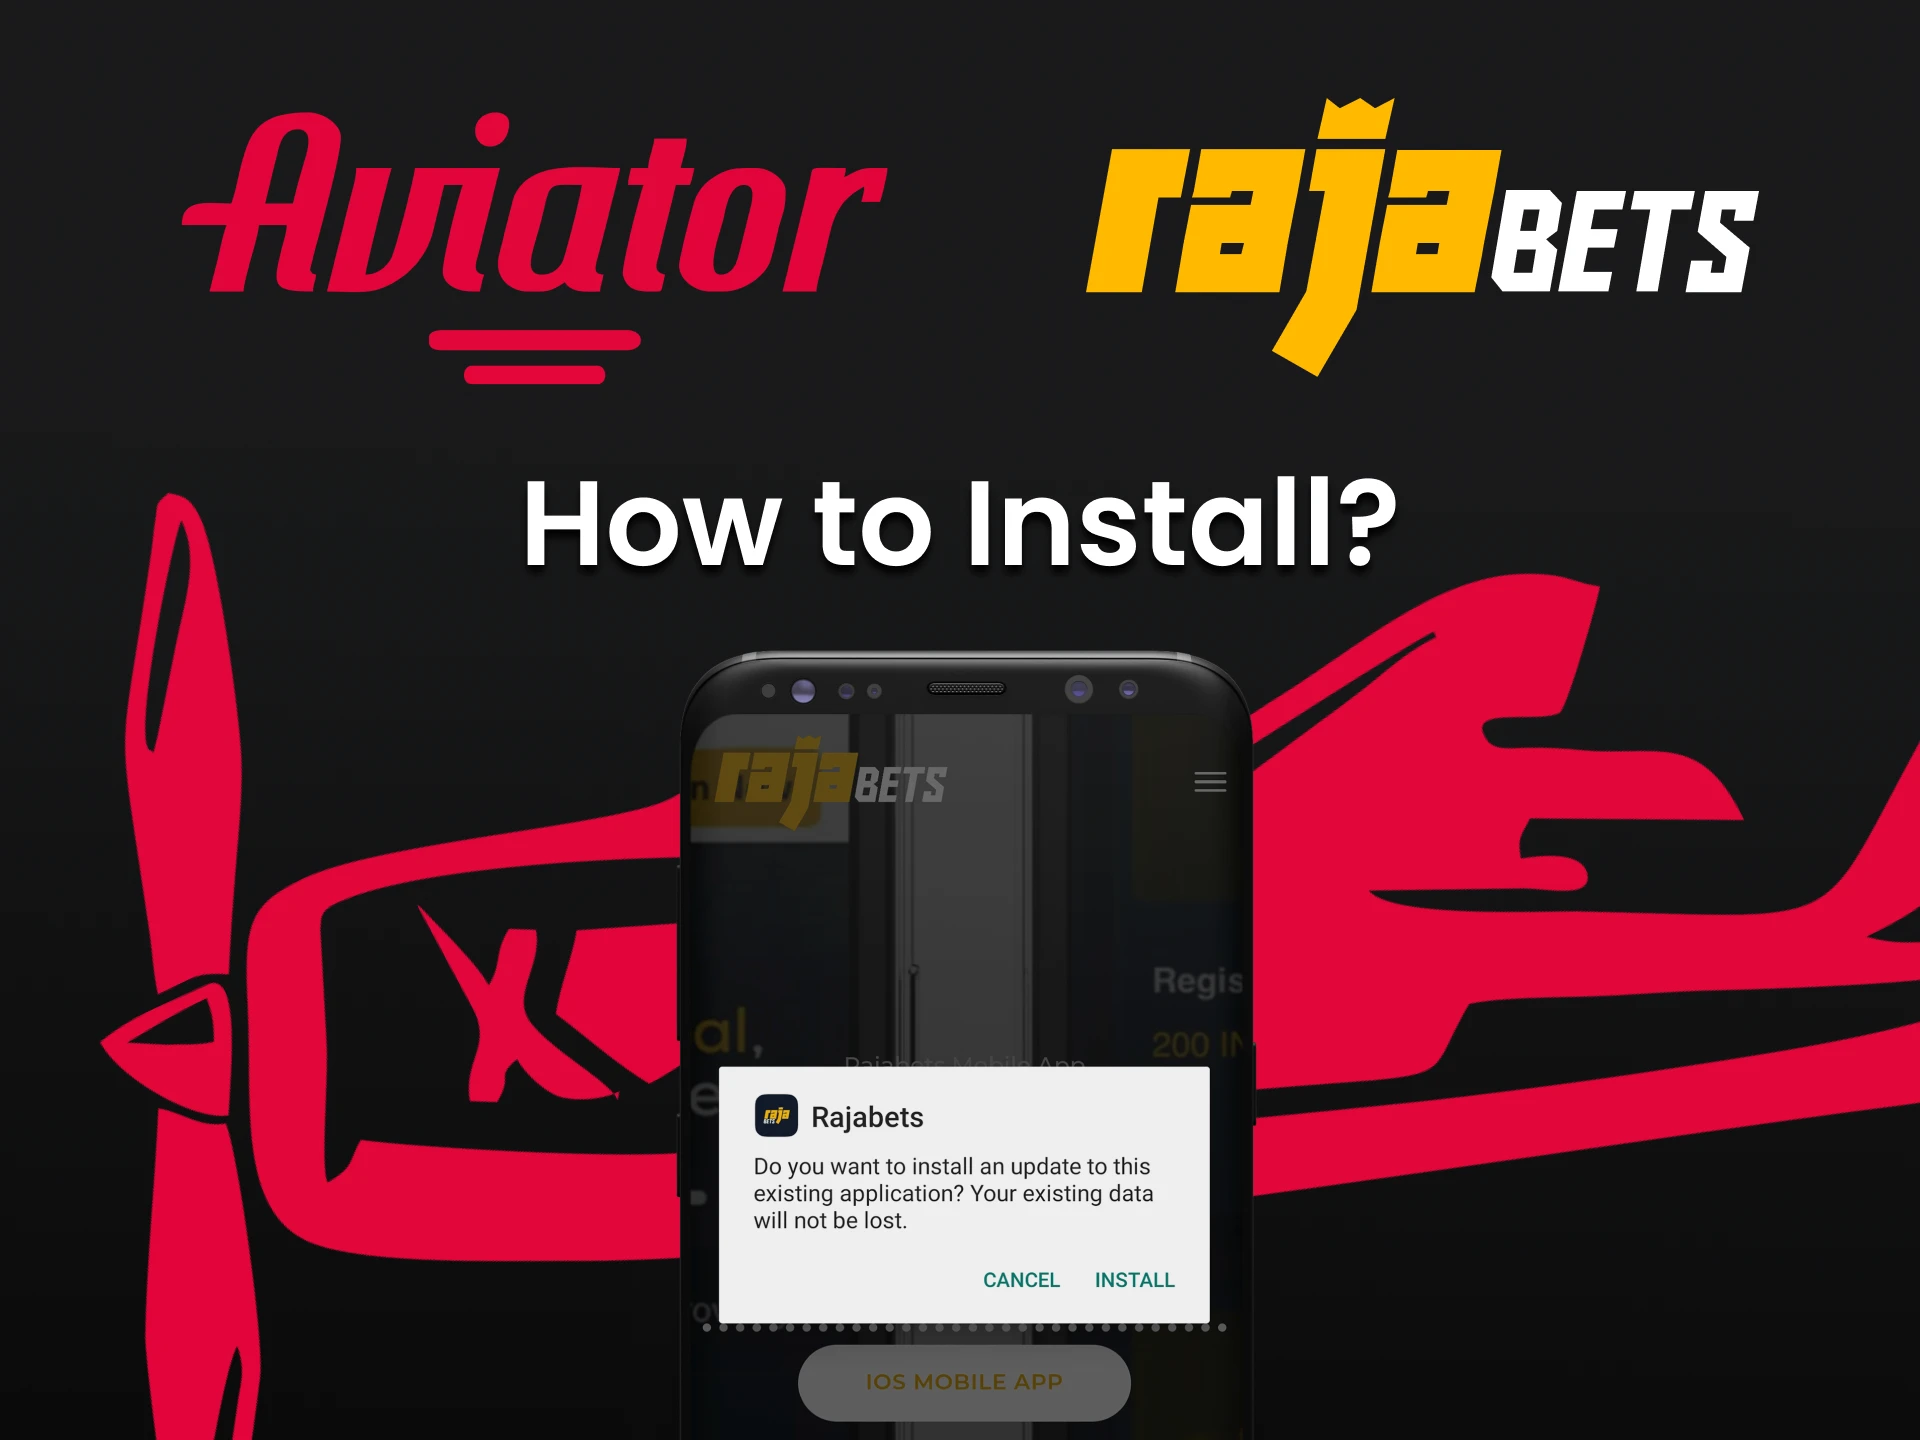 You can install the Rajabets app to play Aviator.